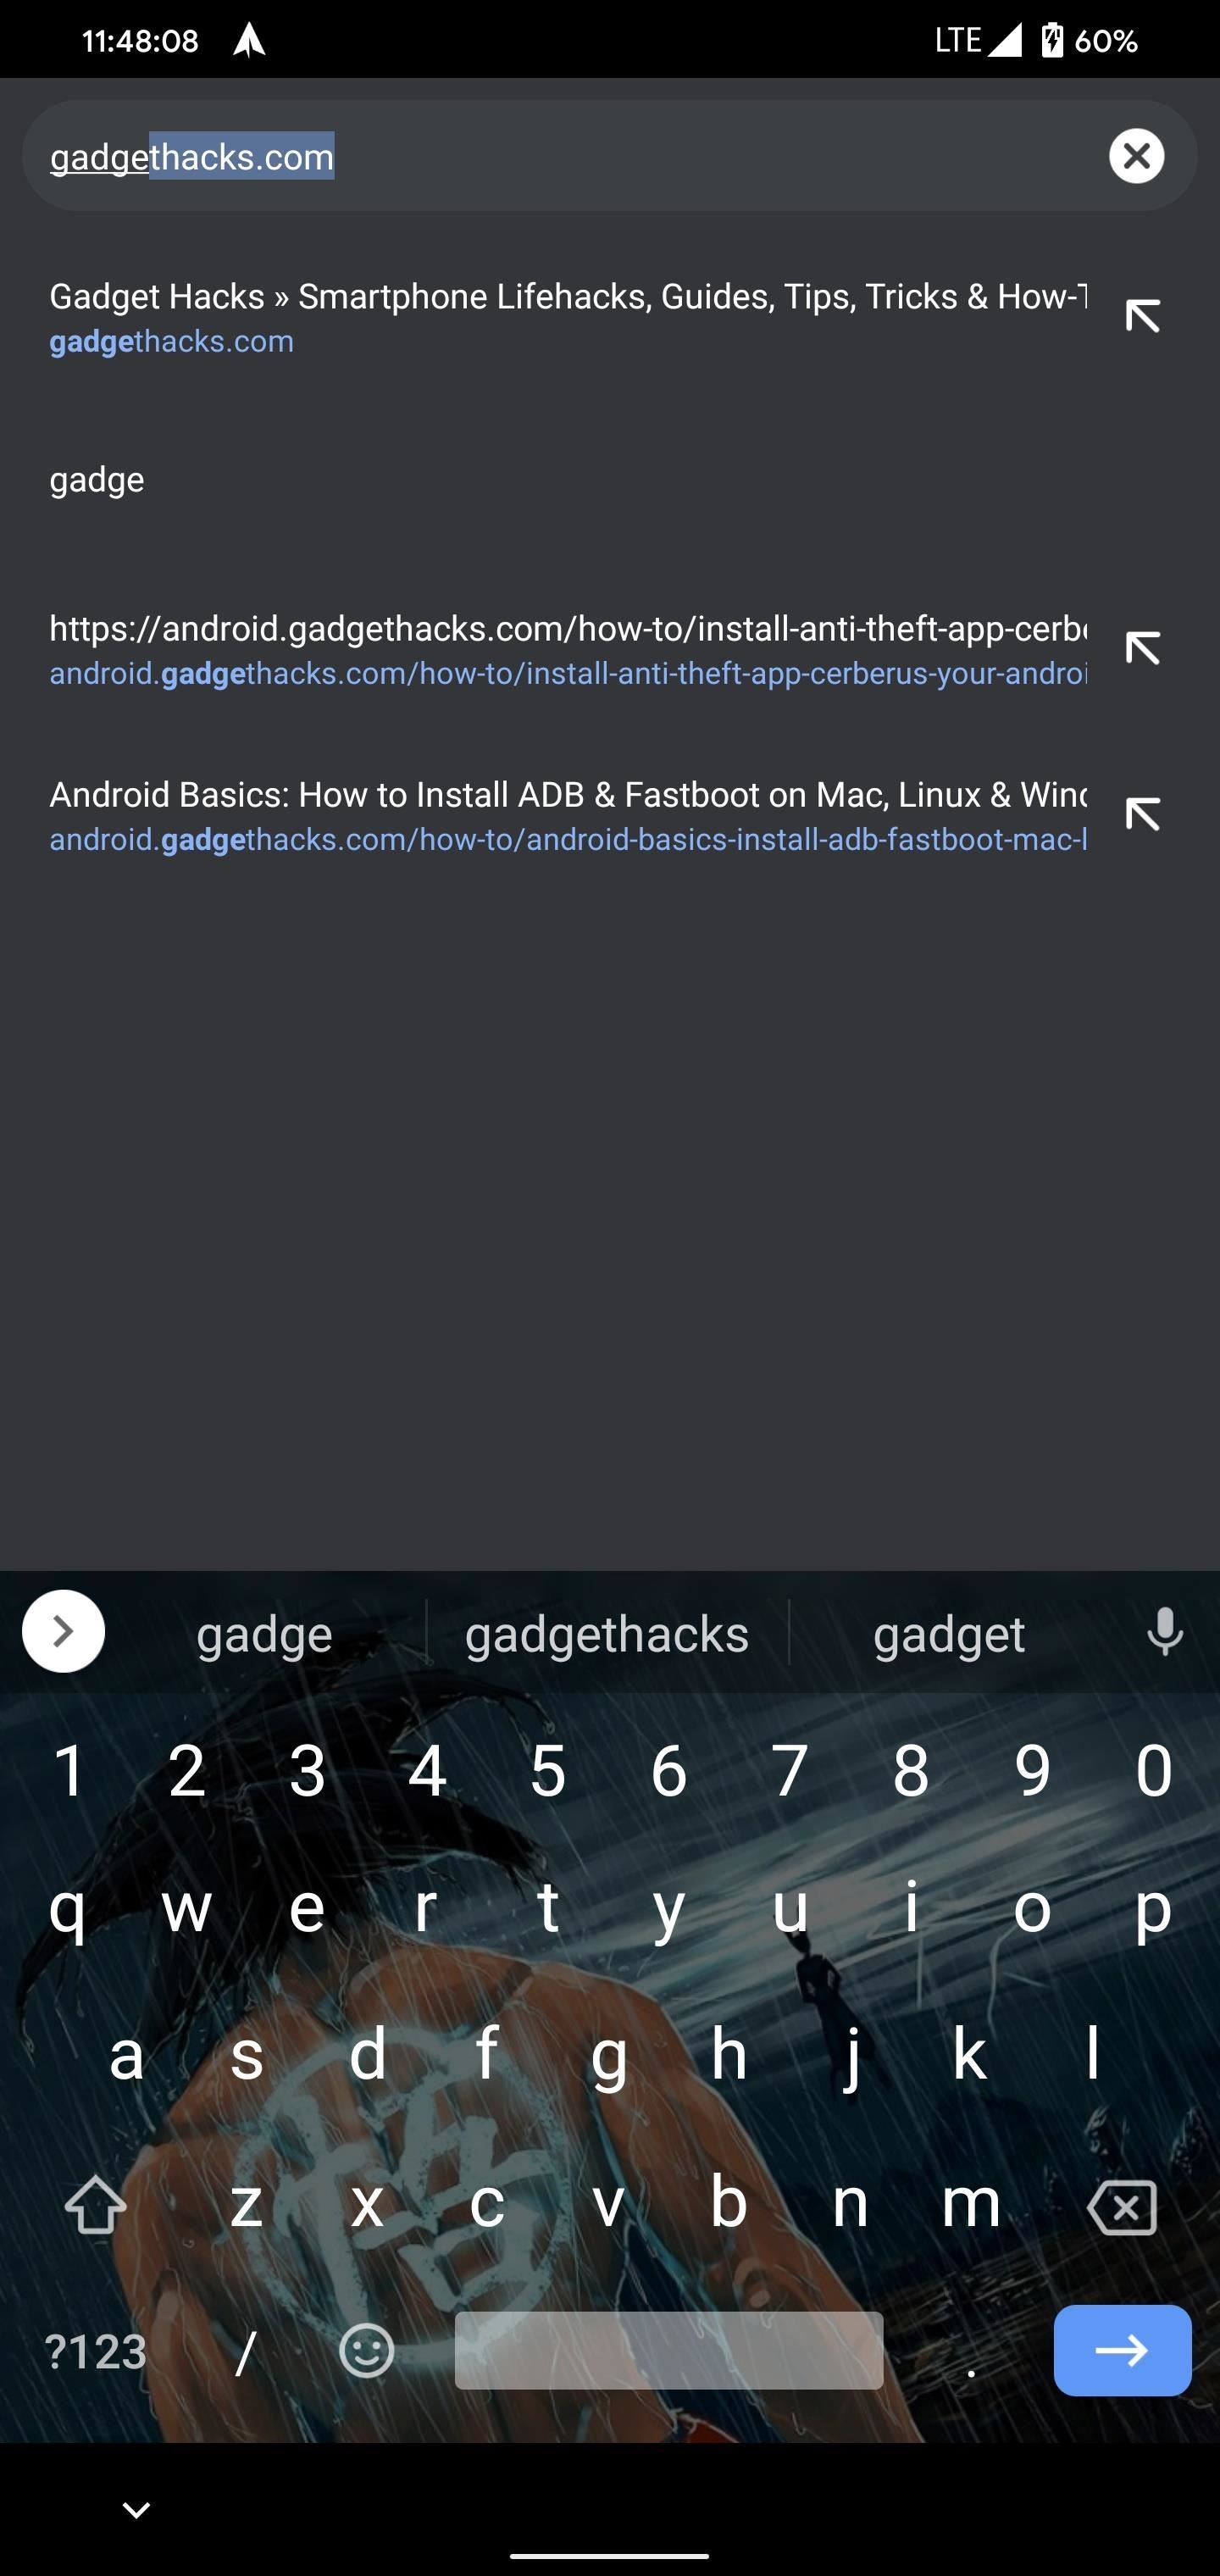 You Can Add Chrome's Address Bar Directly to Your Home Screen